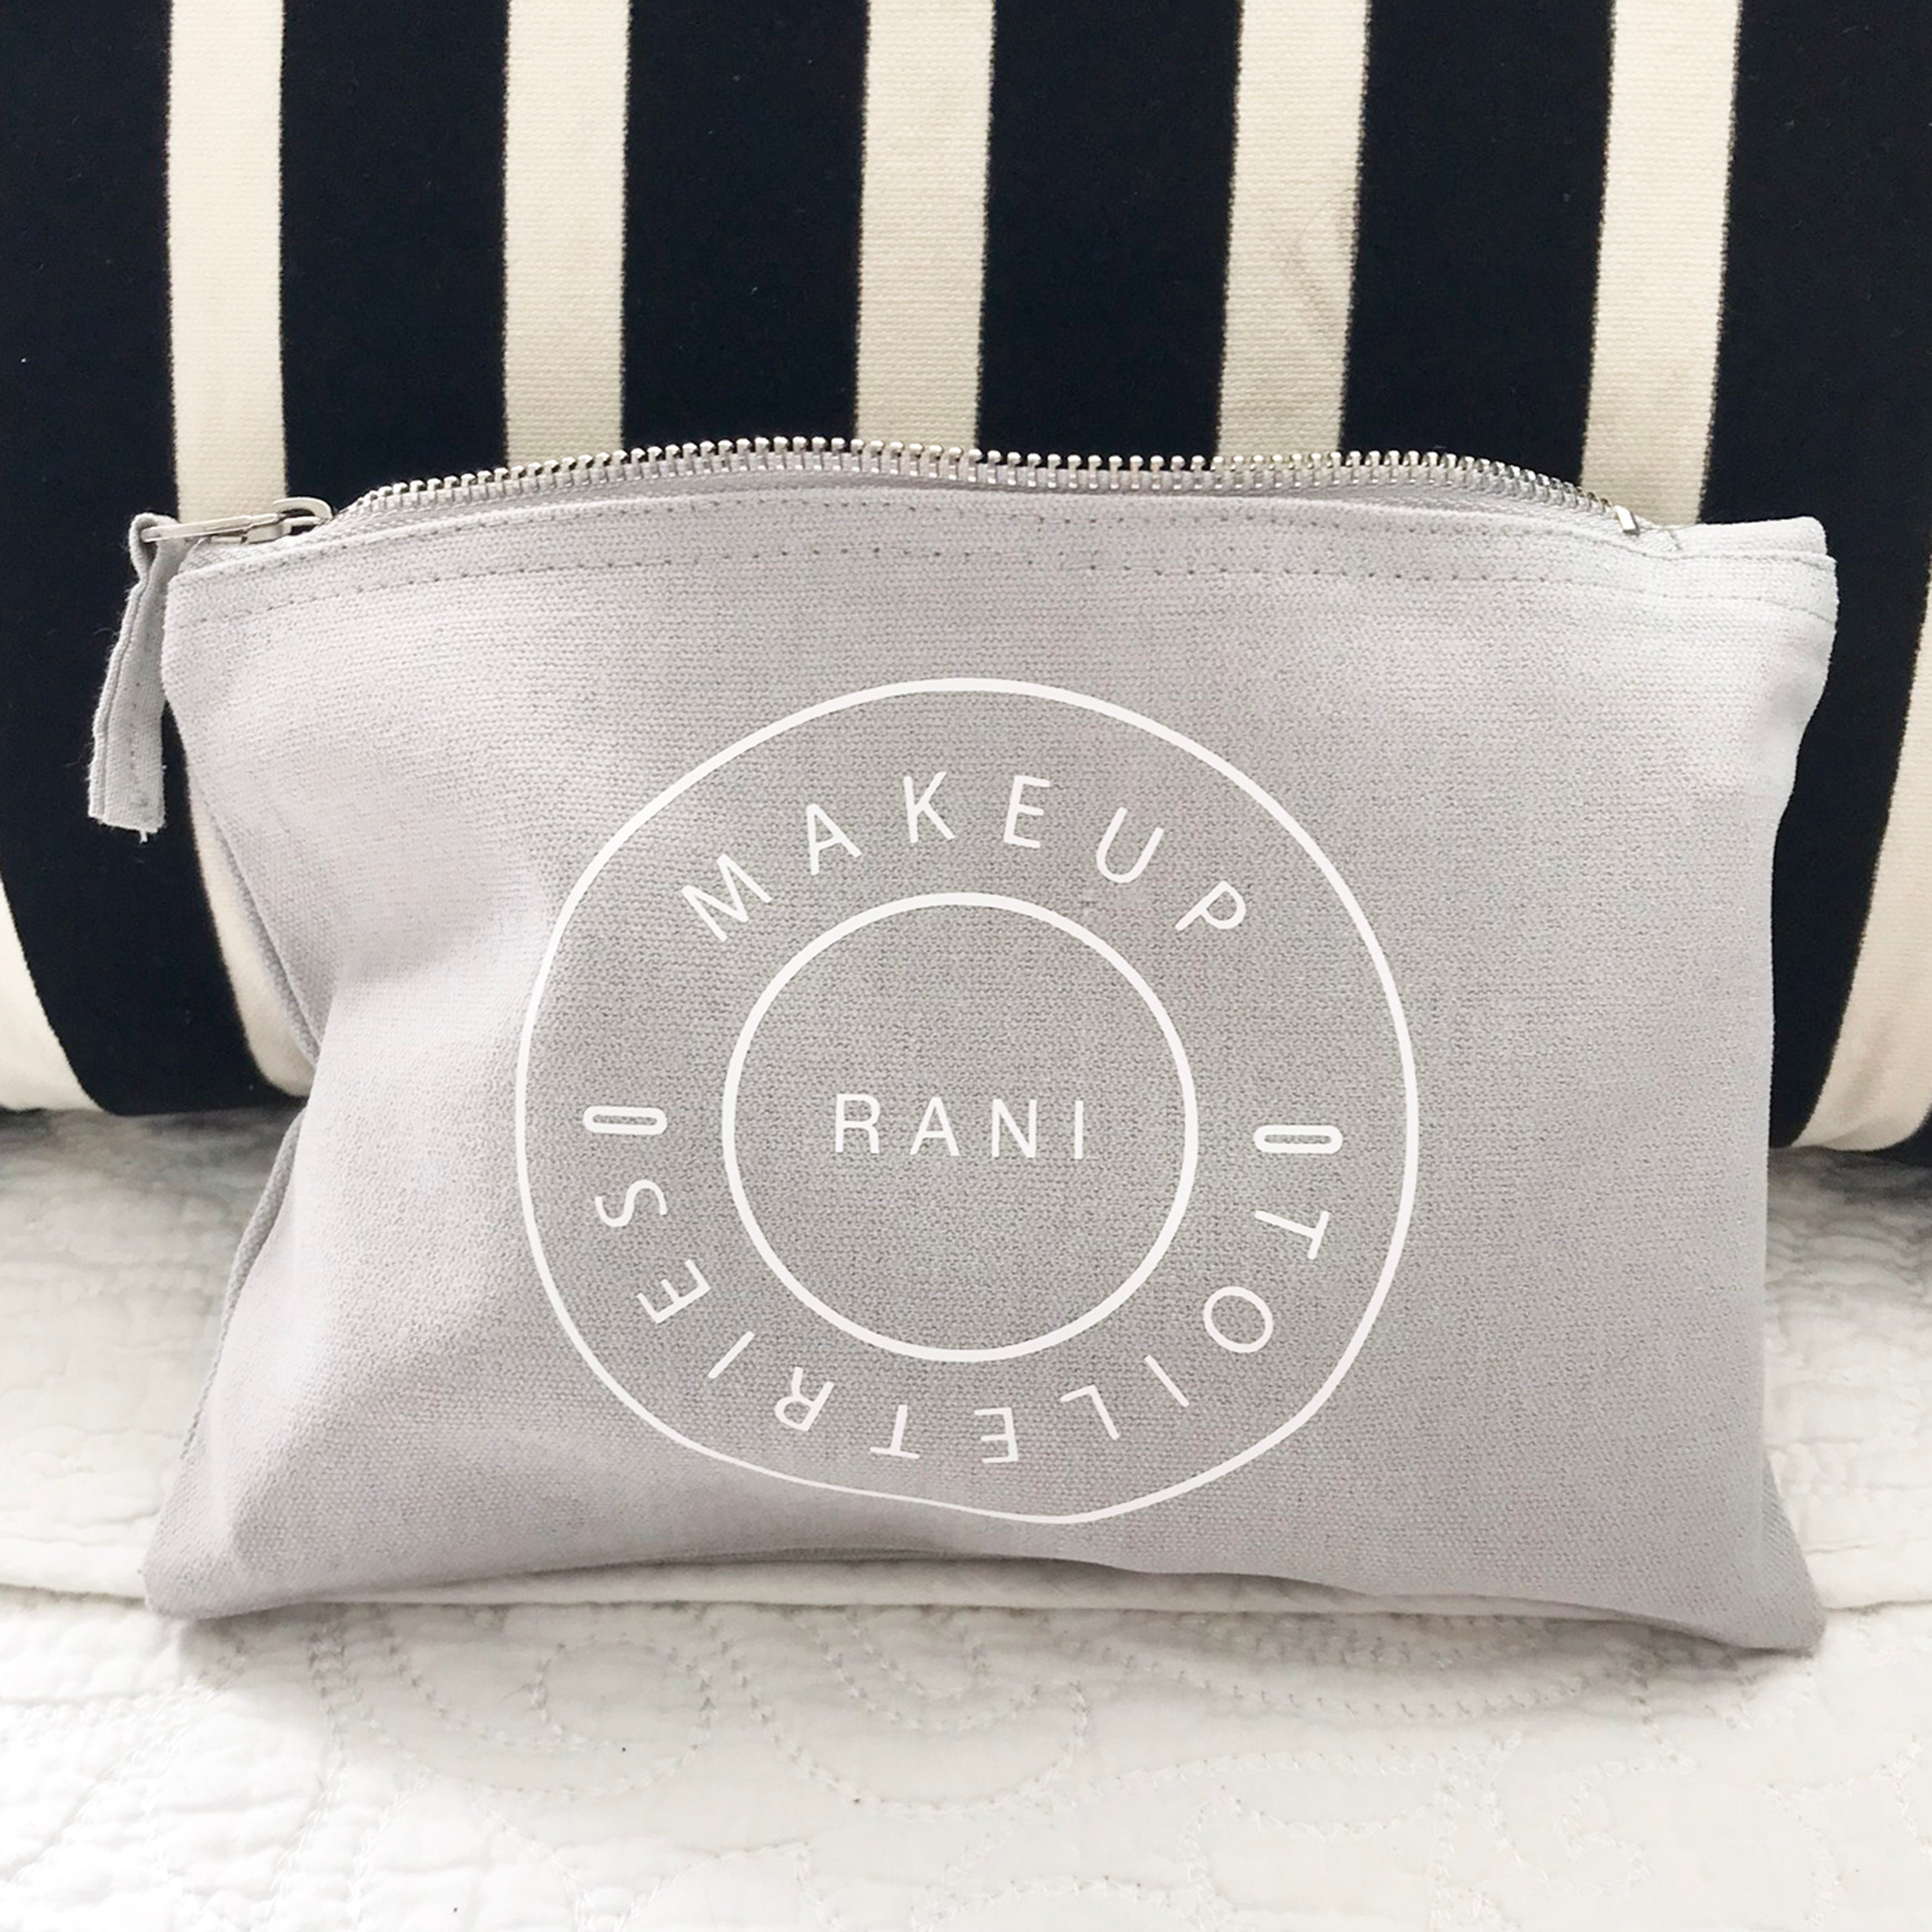 Personalised Minimalist makeup pouch